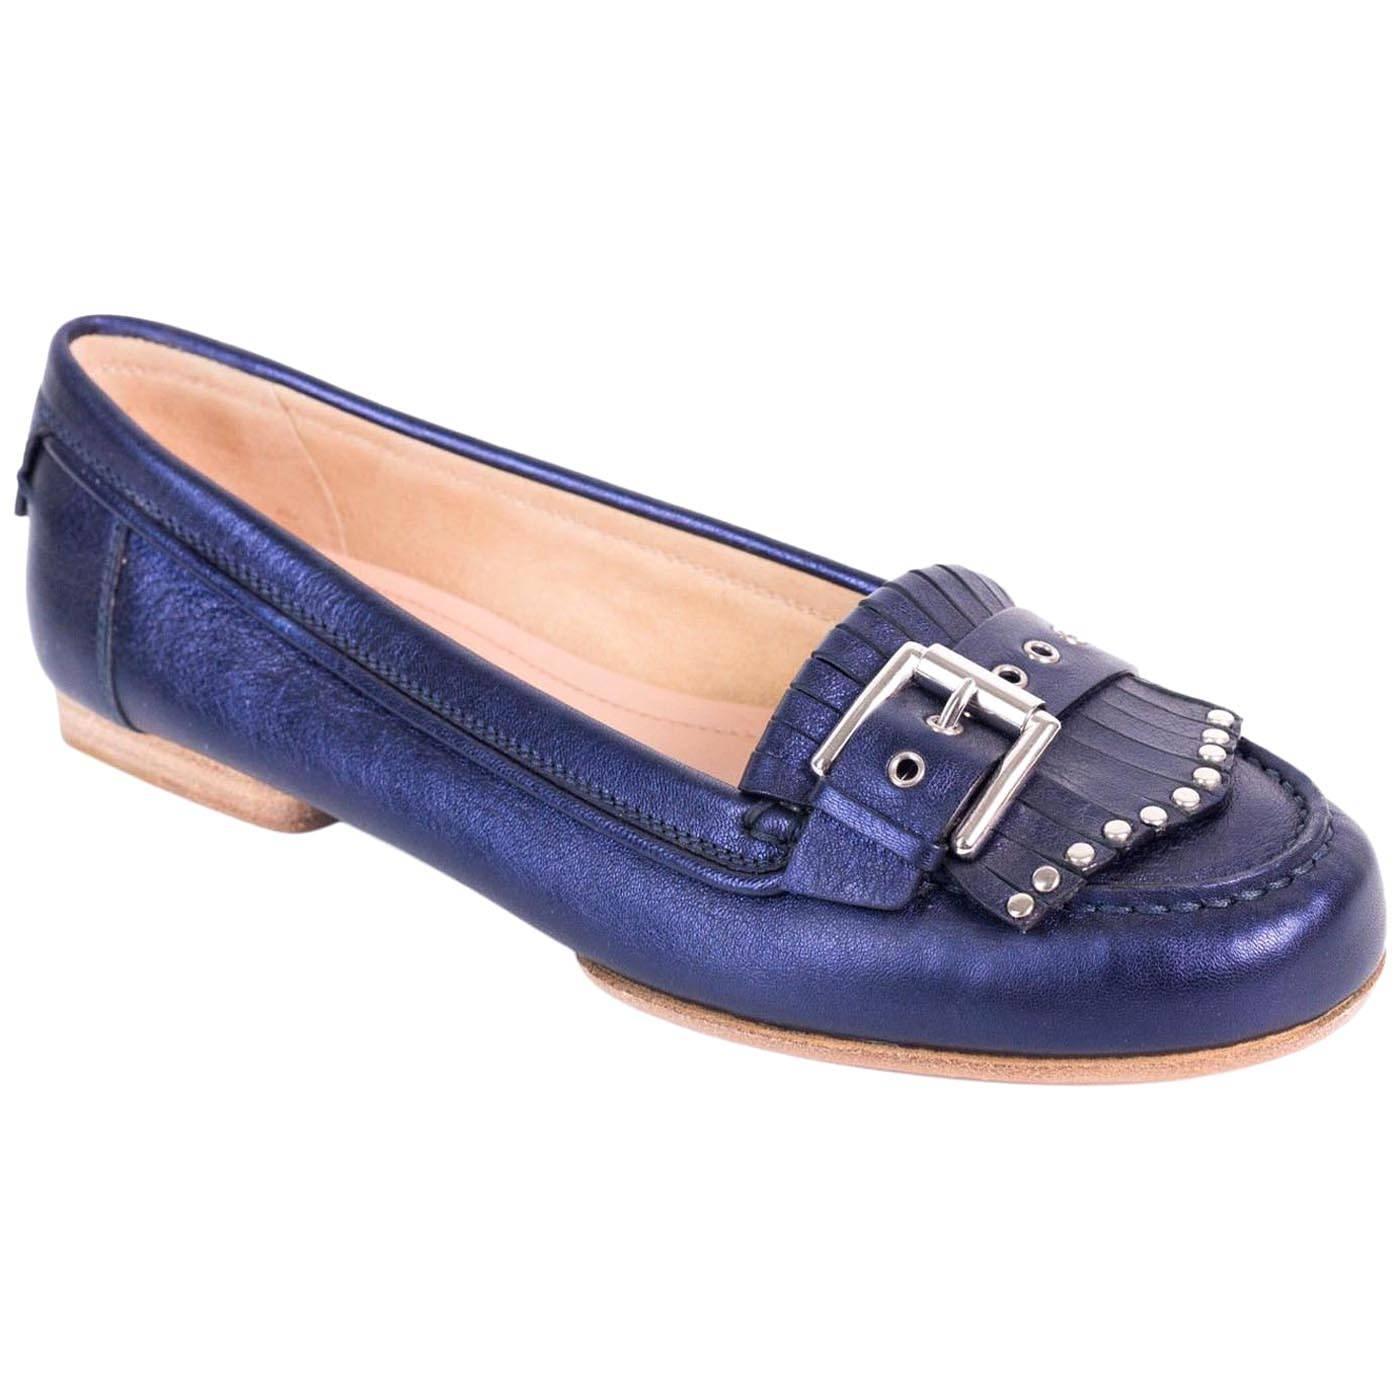 Gianvito Rossi Metallic Blue Leather Studded Buckle Moccasins For Sale